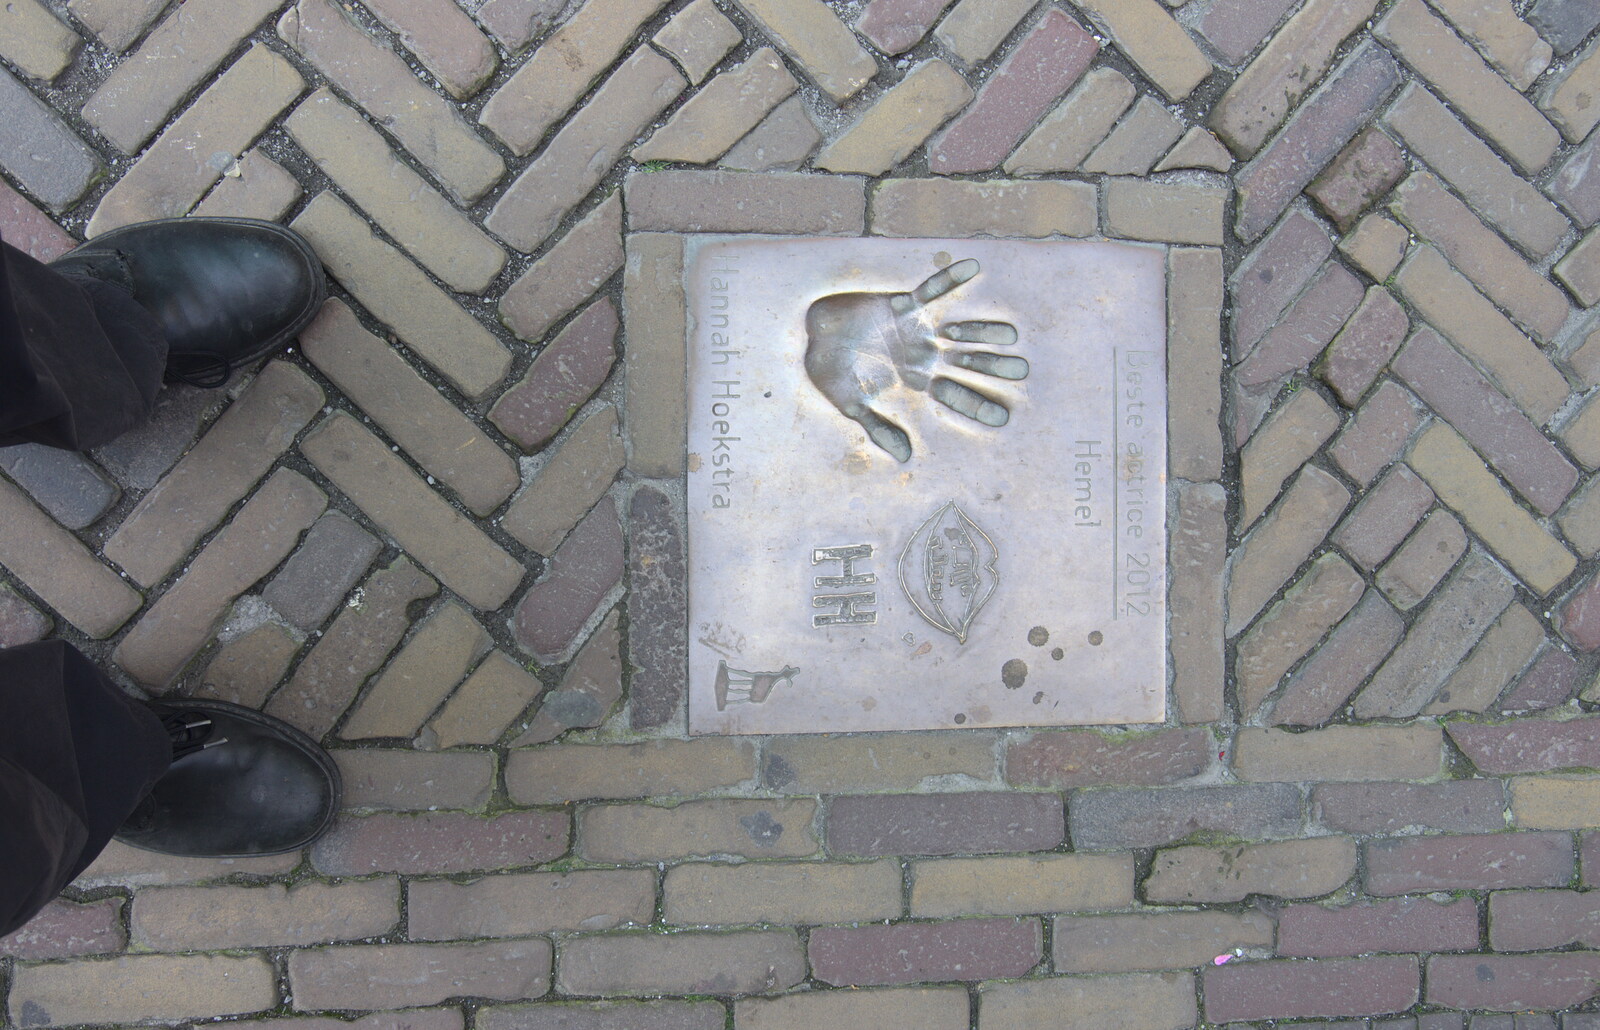 There's some kind of 'Hollywood walk of fame' from A Postcard from Utrecht, Nederlands - 10th June 2018